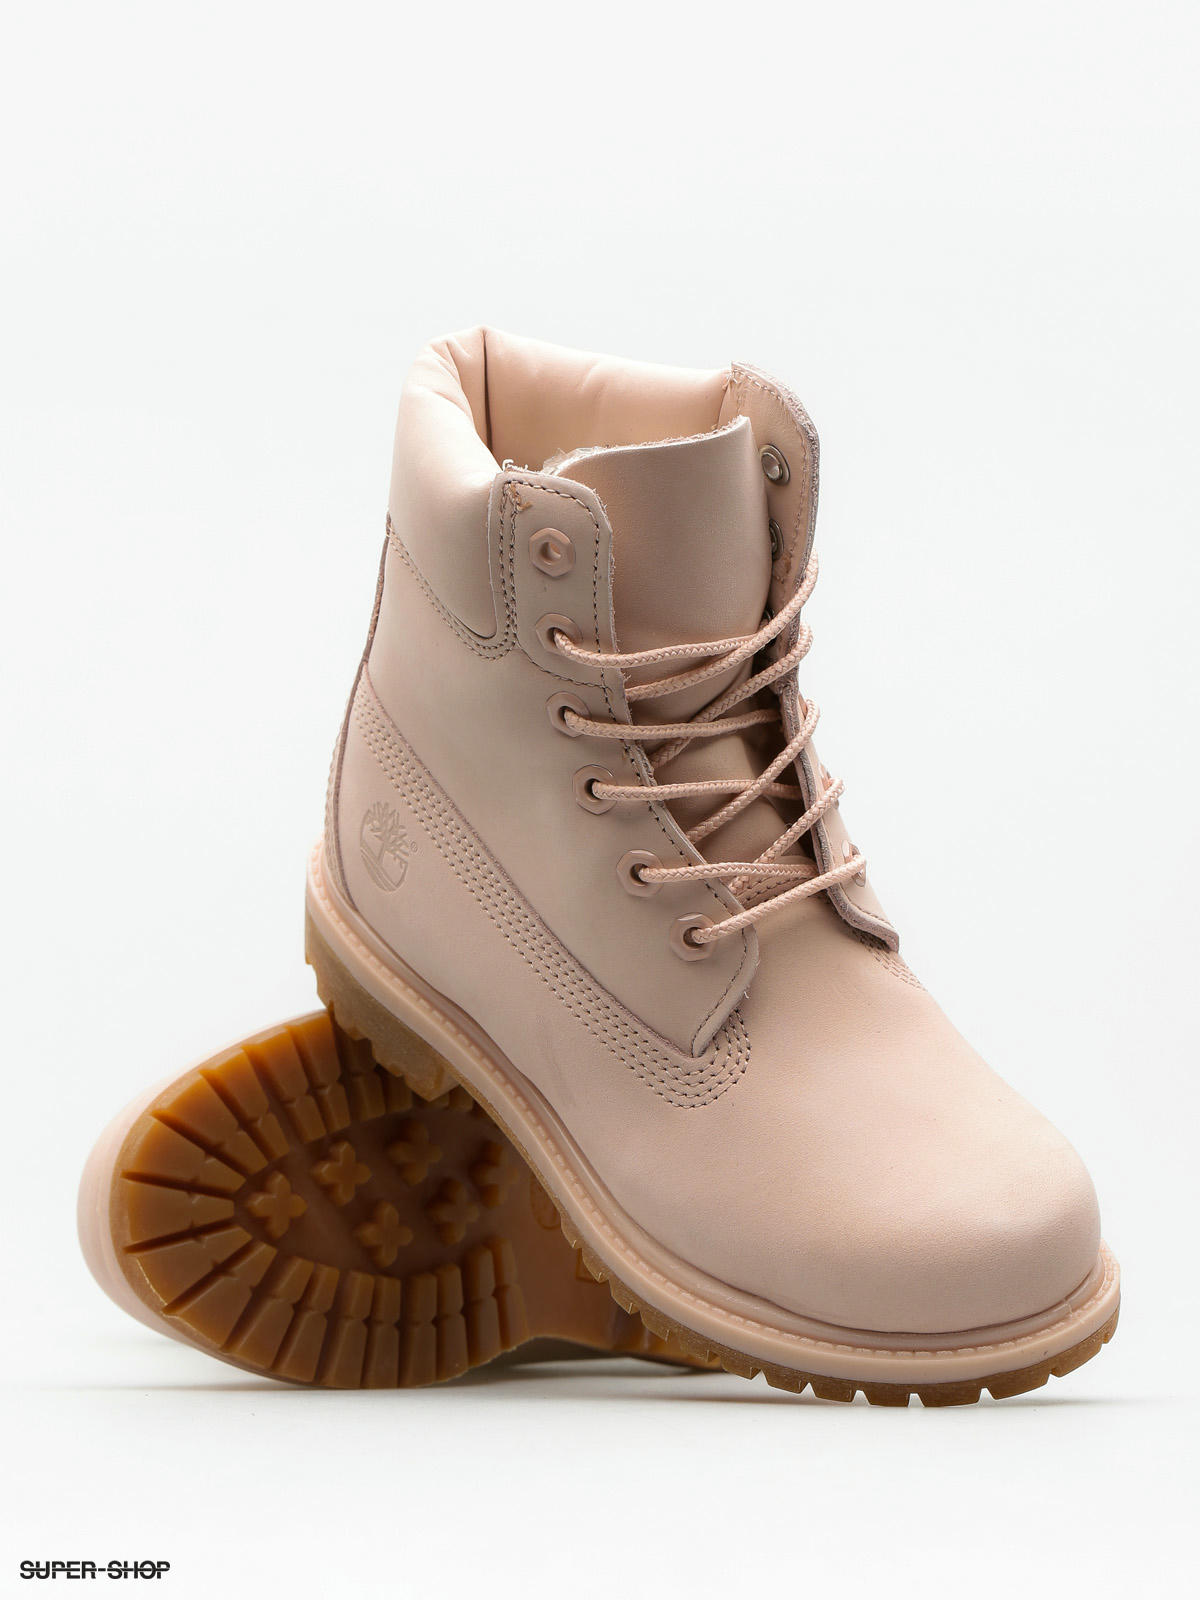 light in the timberlands